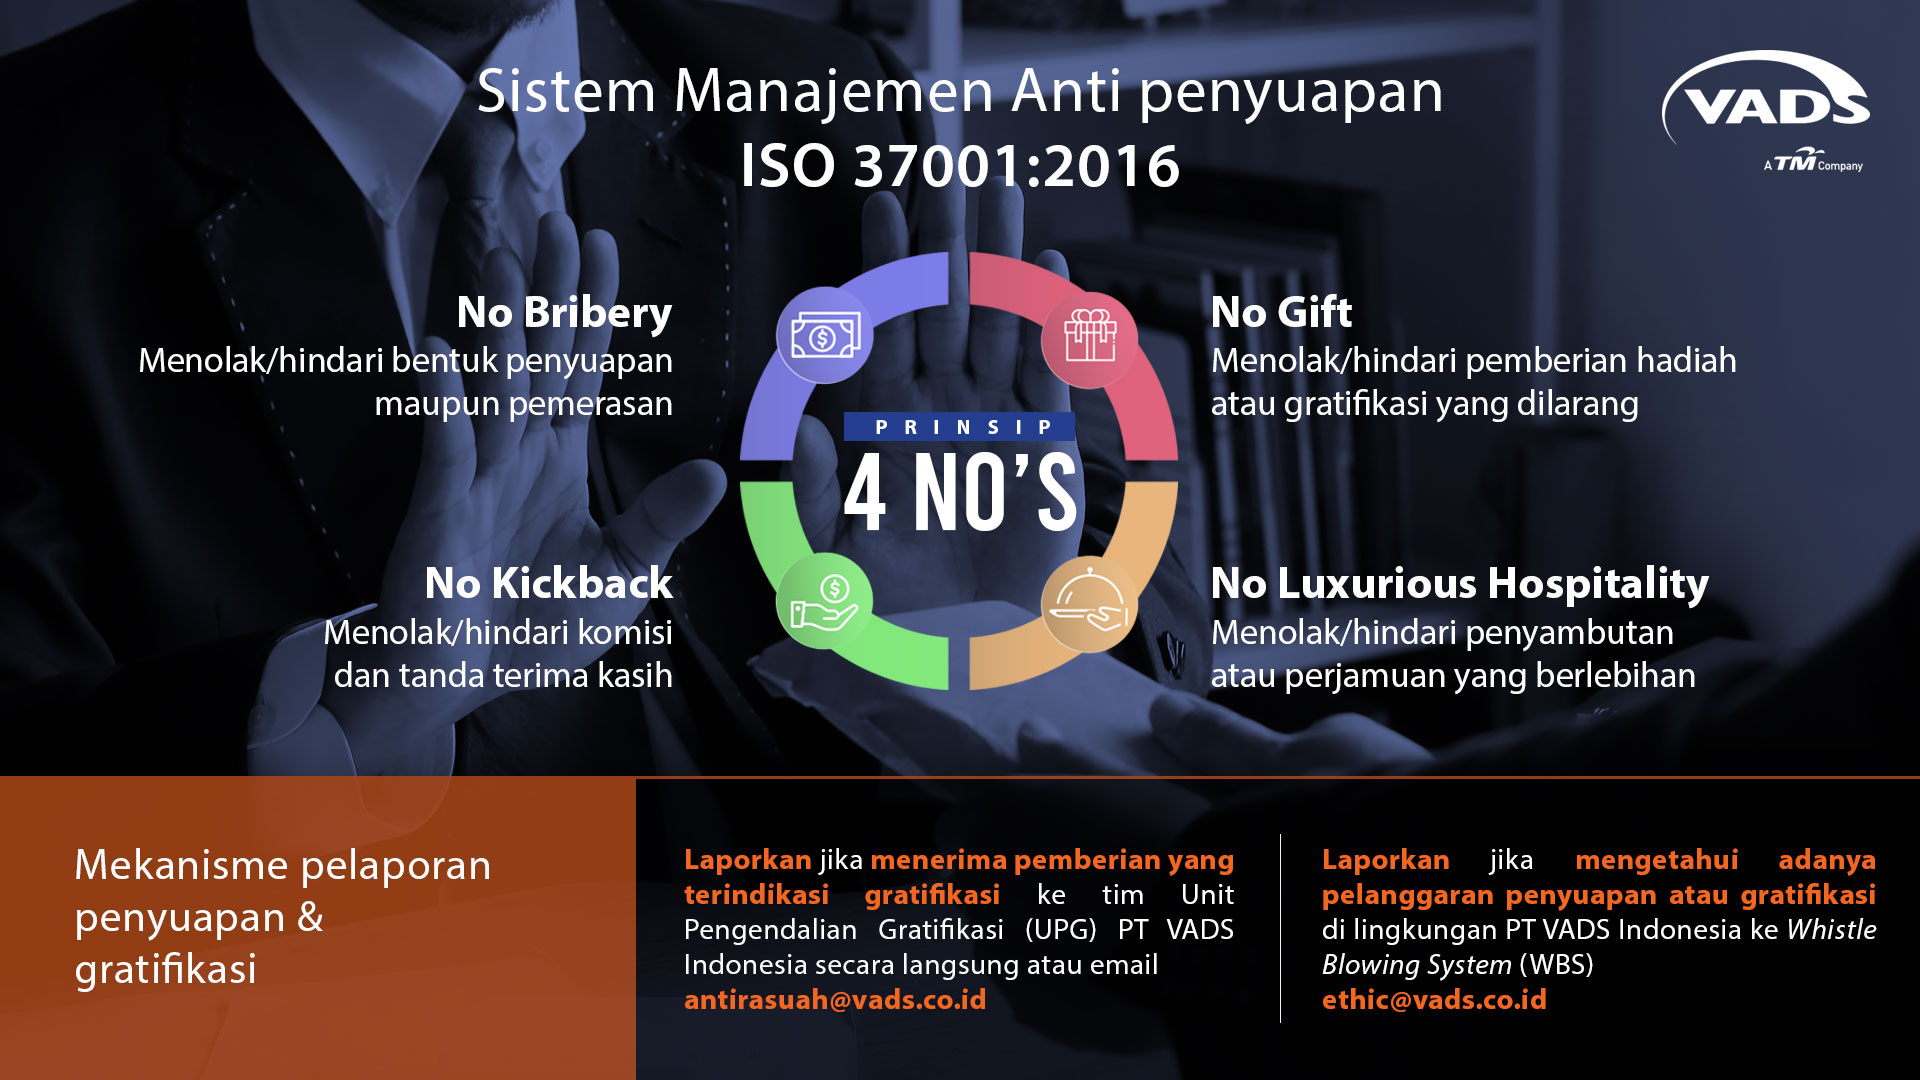 Image of PT VADS Indonesia is Committed to Implementing ISO 37001:2016 Anti-Bribery Management System Policy